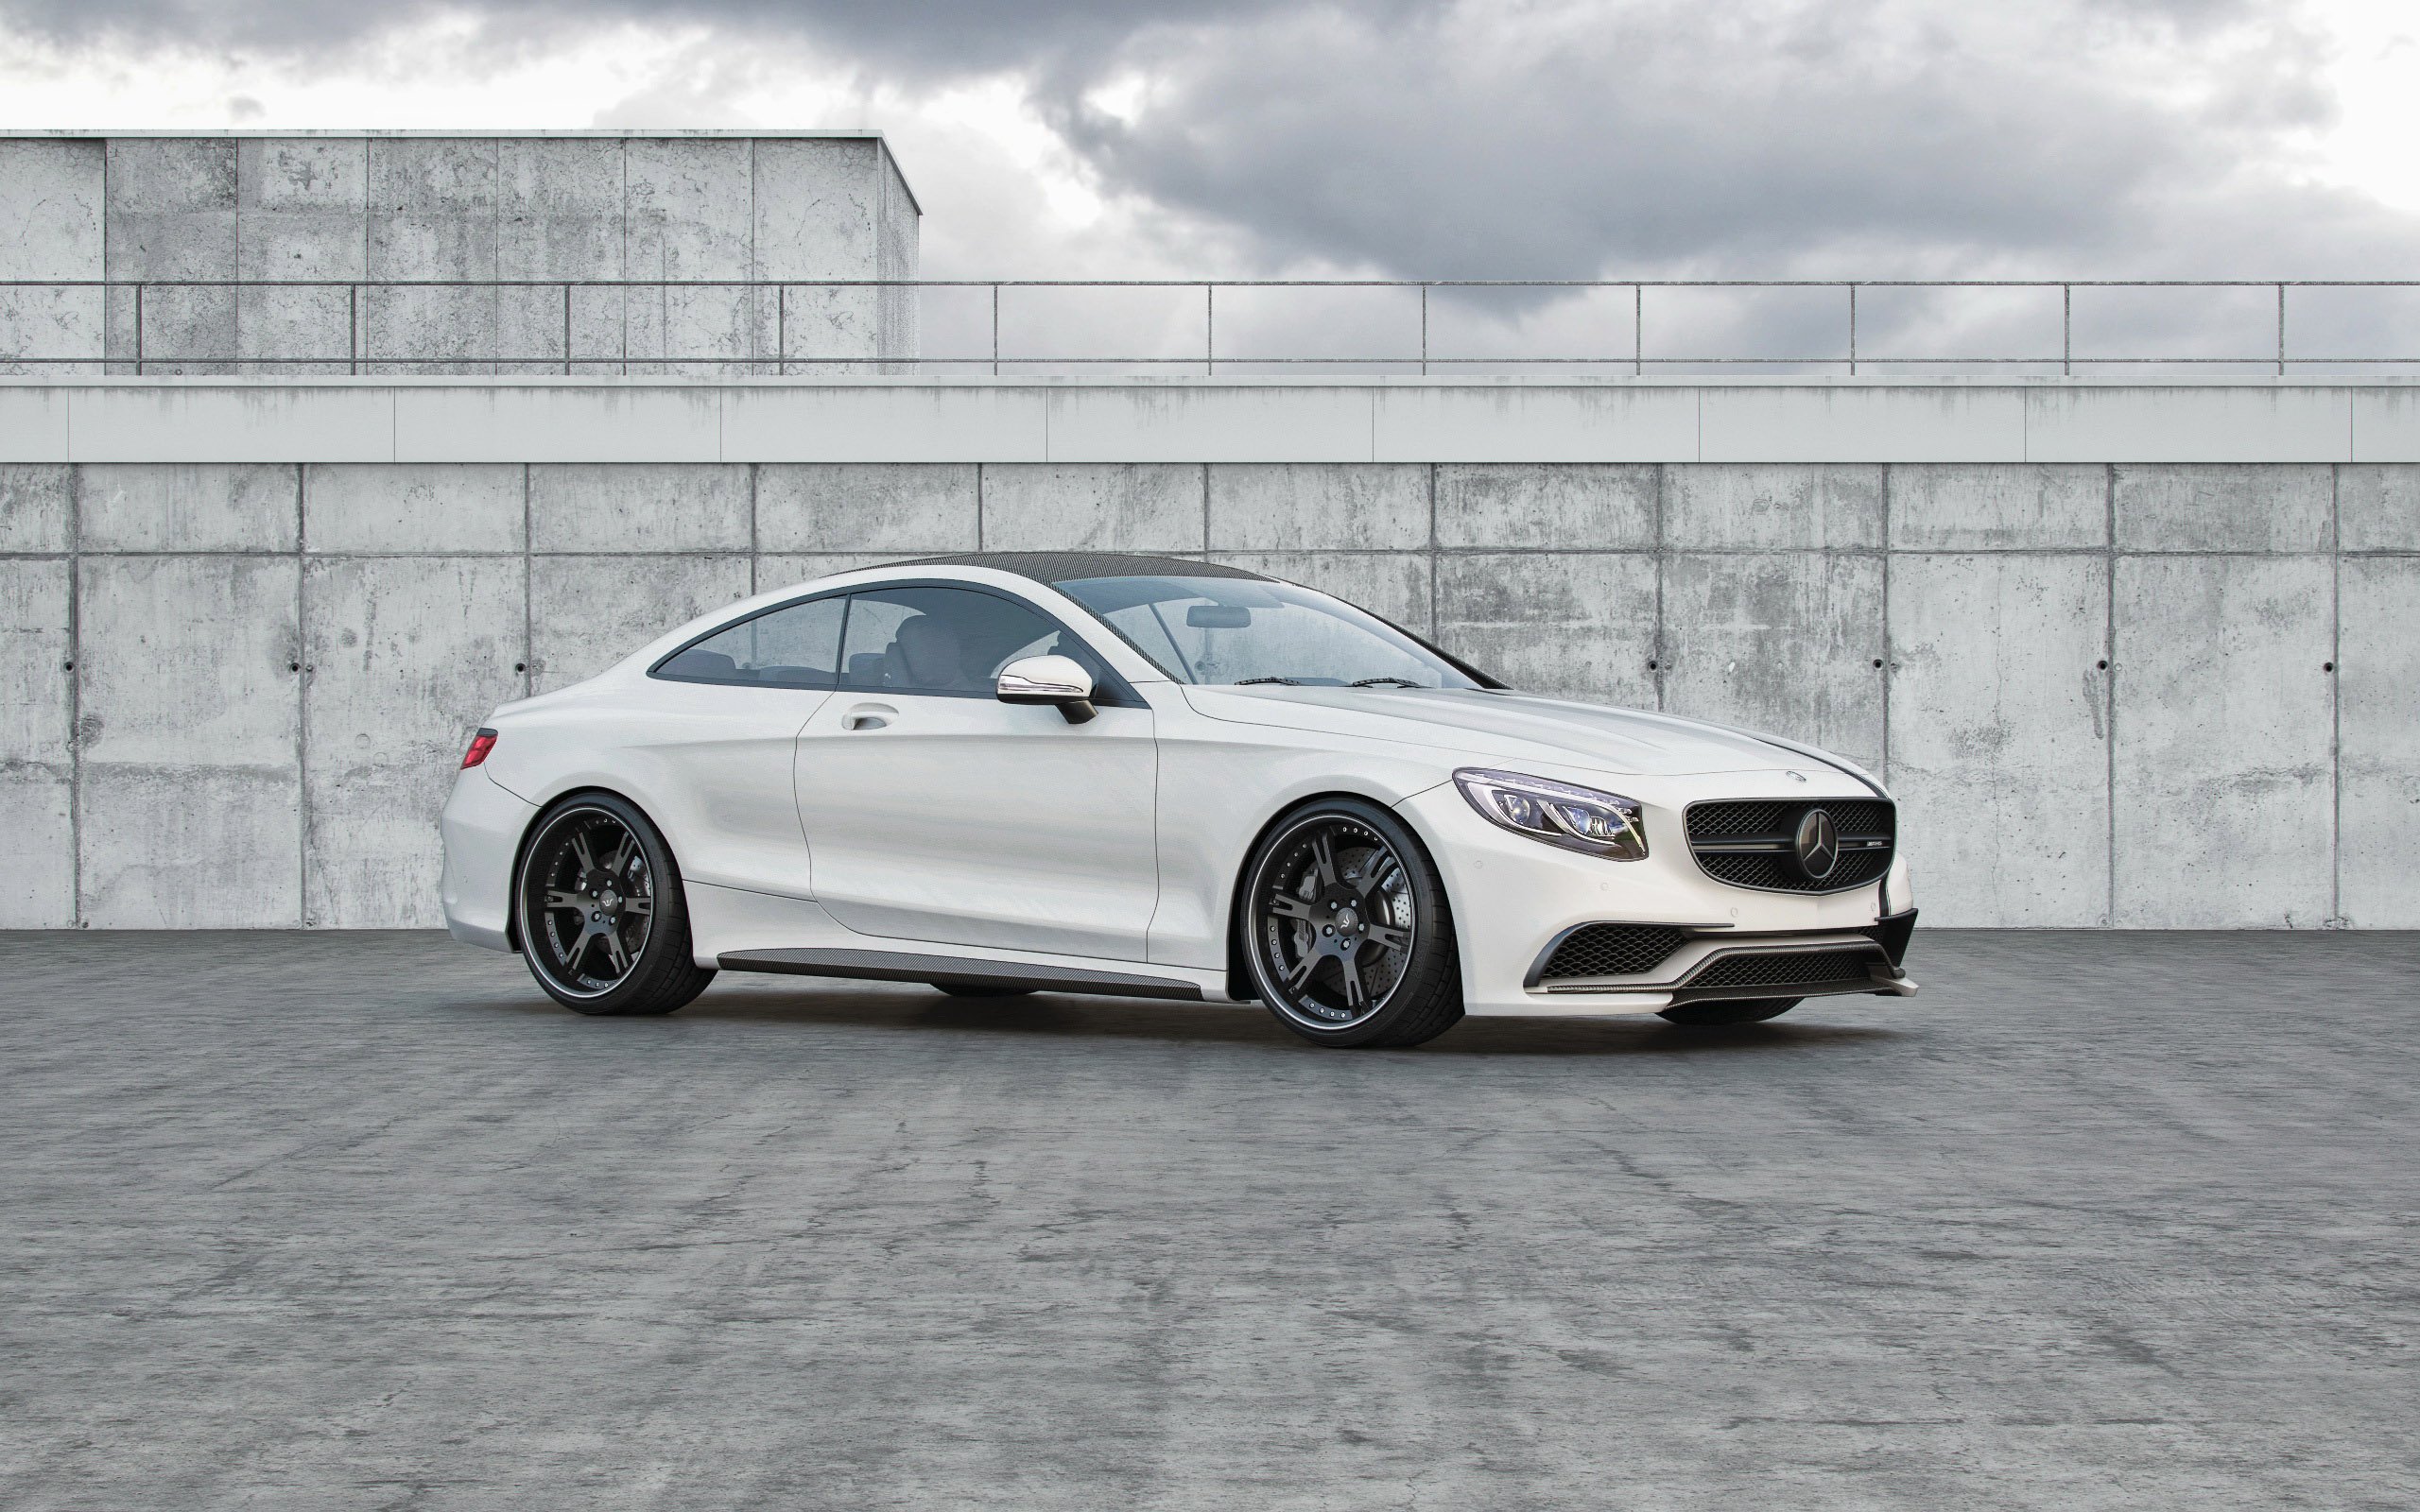 wheelsandmore, Mercedes, Benz, S63, Amg, Coupe, Seven 11,  c217 , Cars, Modified, 2015 Wallpaper